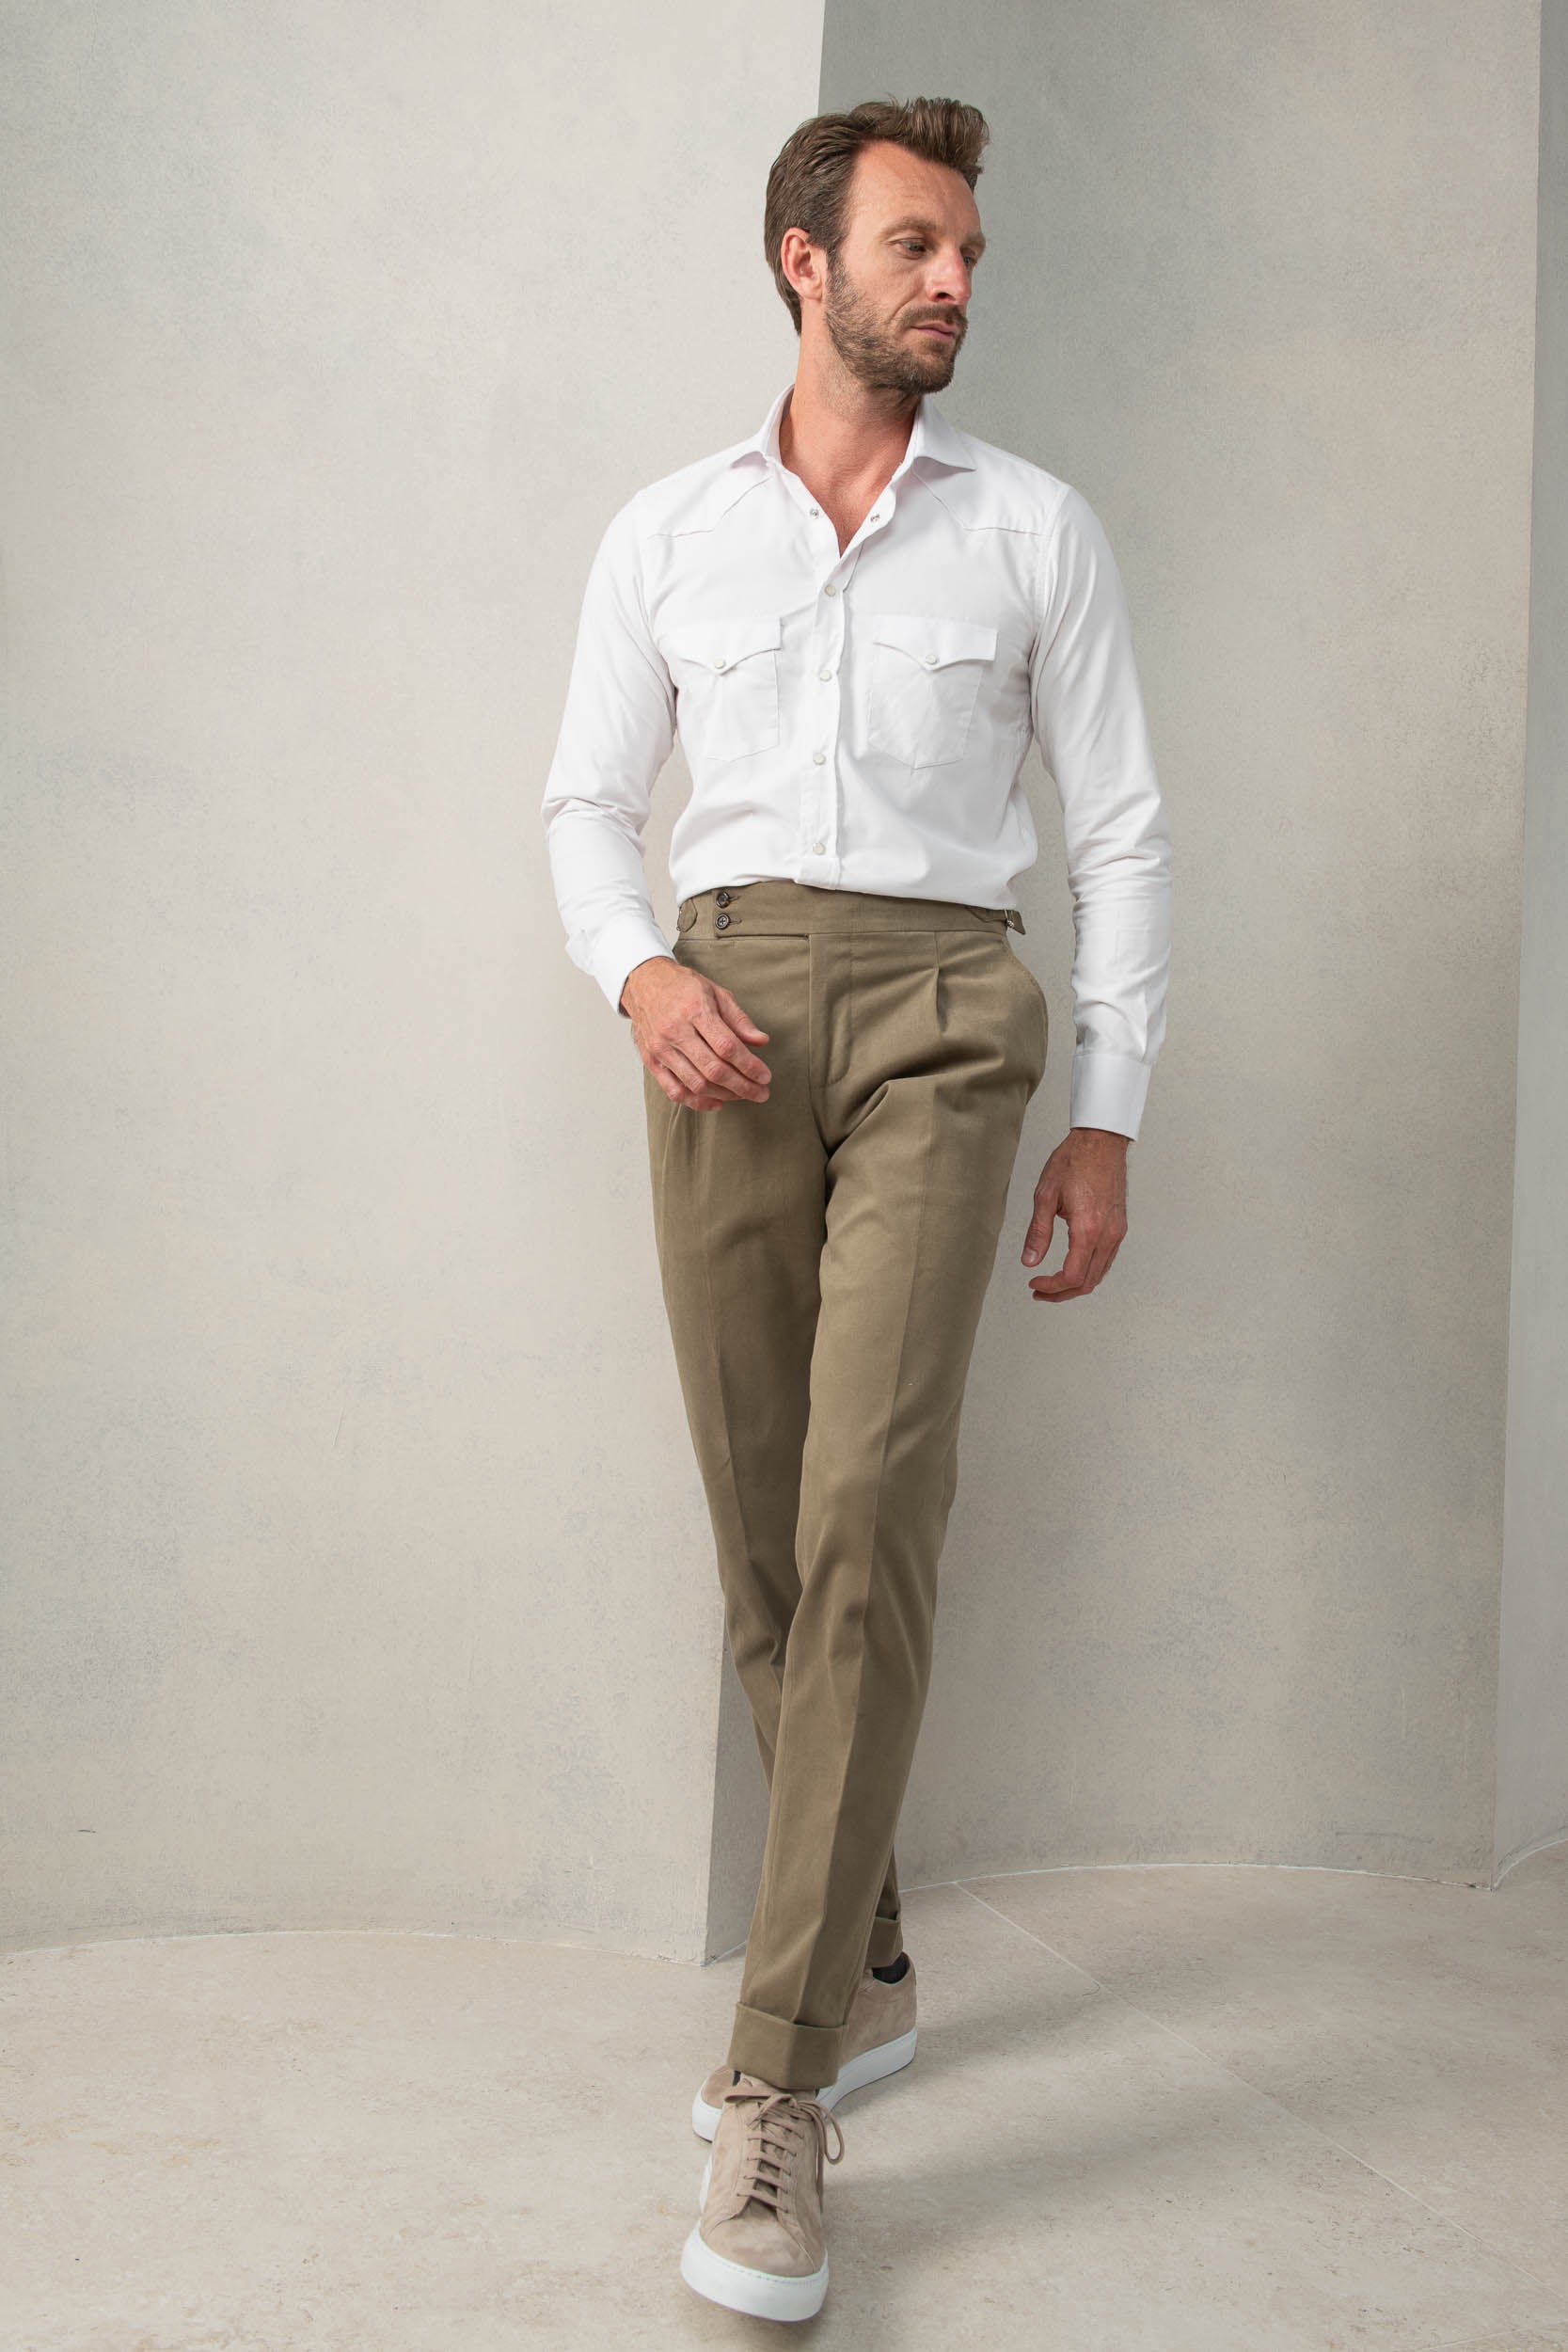 Discover Trousers & Jeans in the windsor. Online Shop